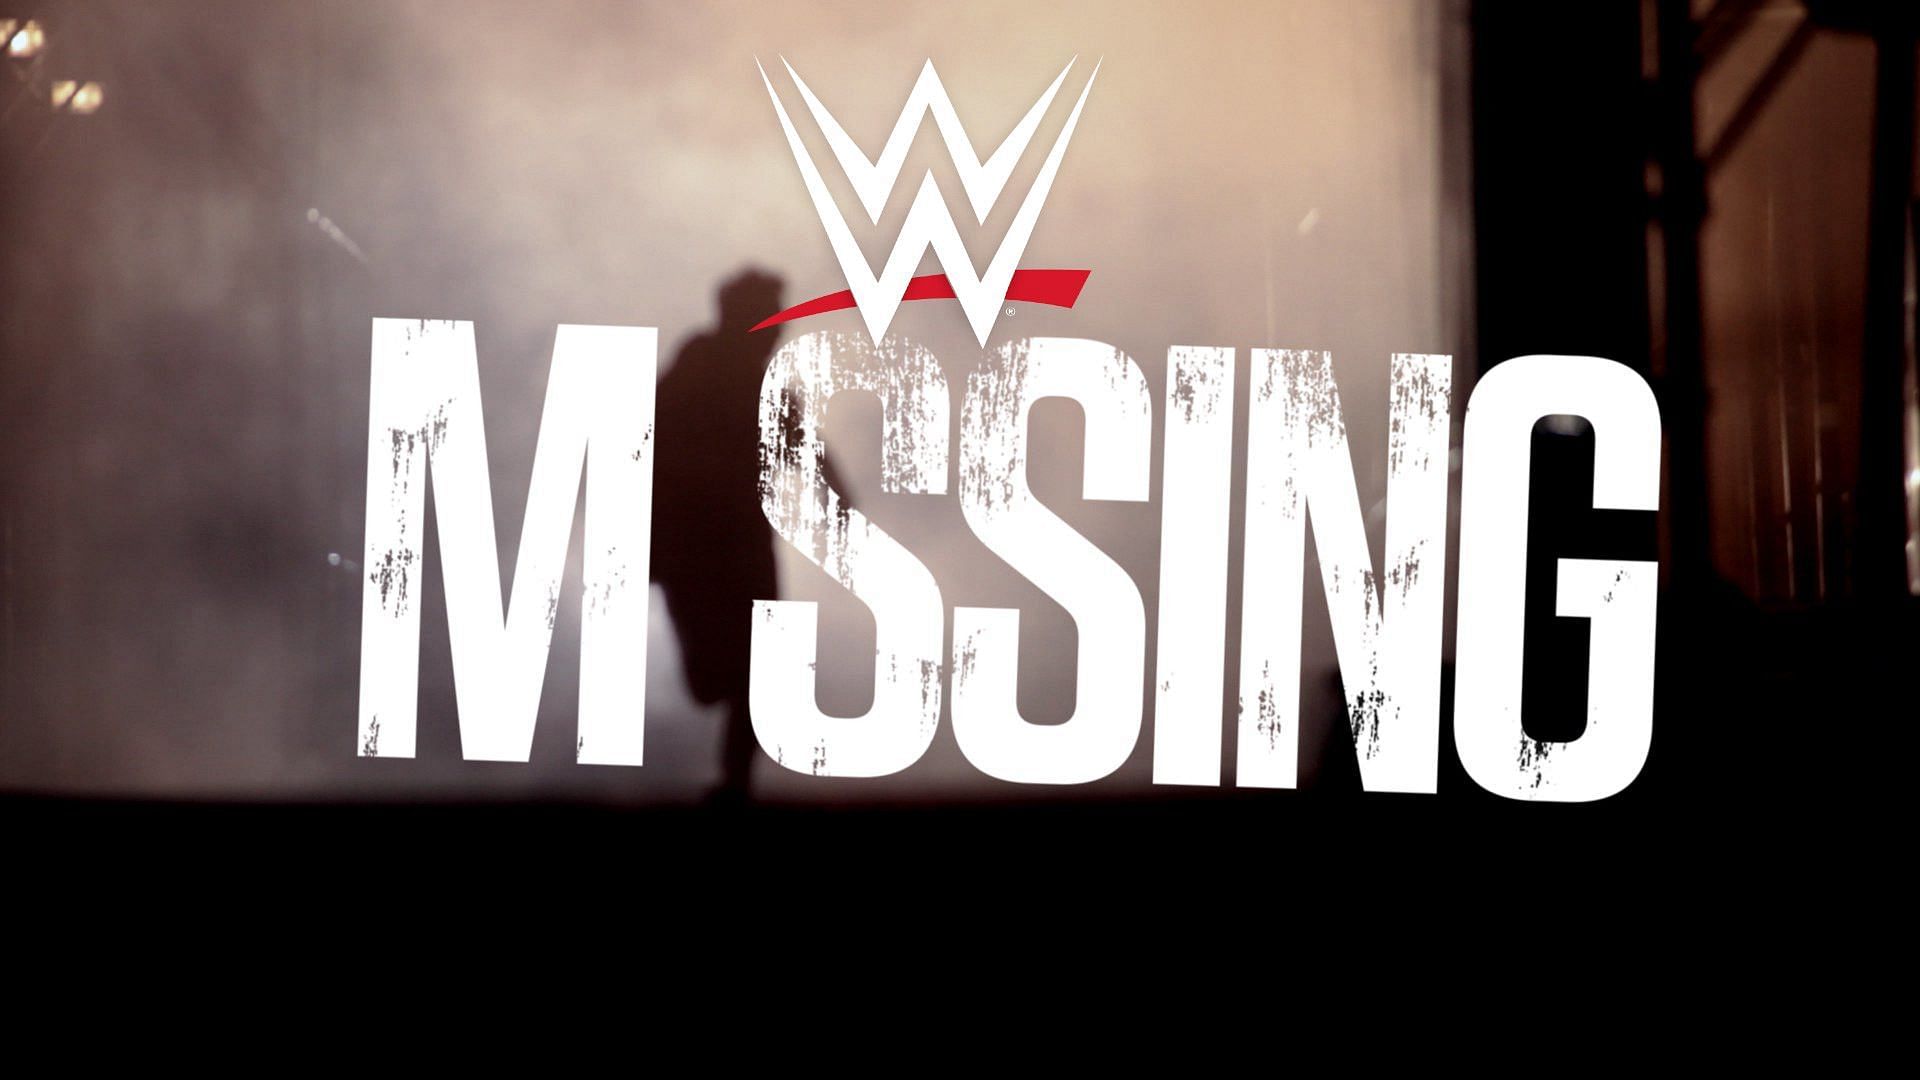 These are the Superstars who have suddenly disappeared from WWE television.